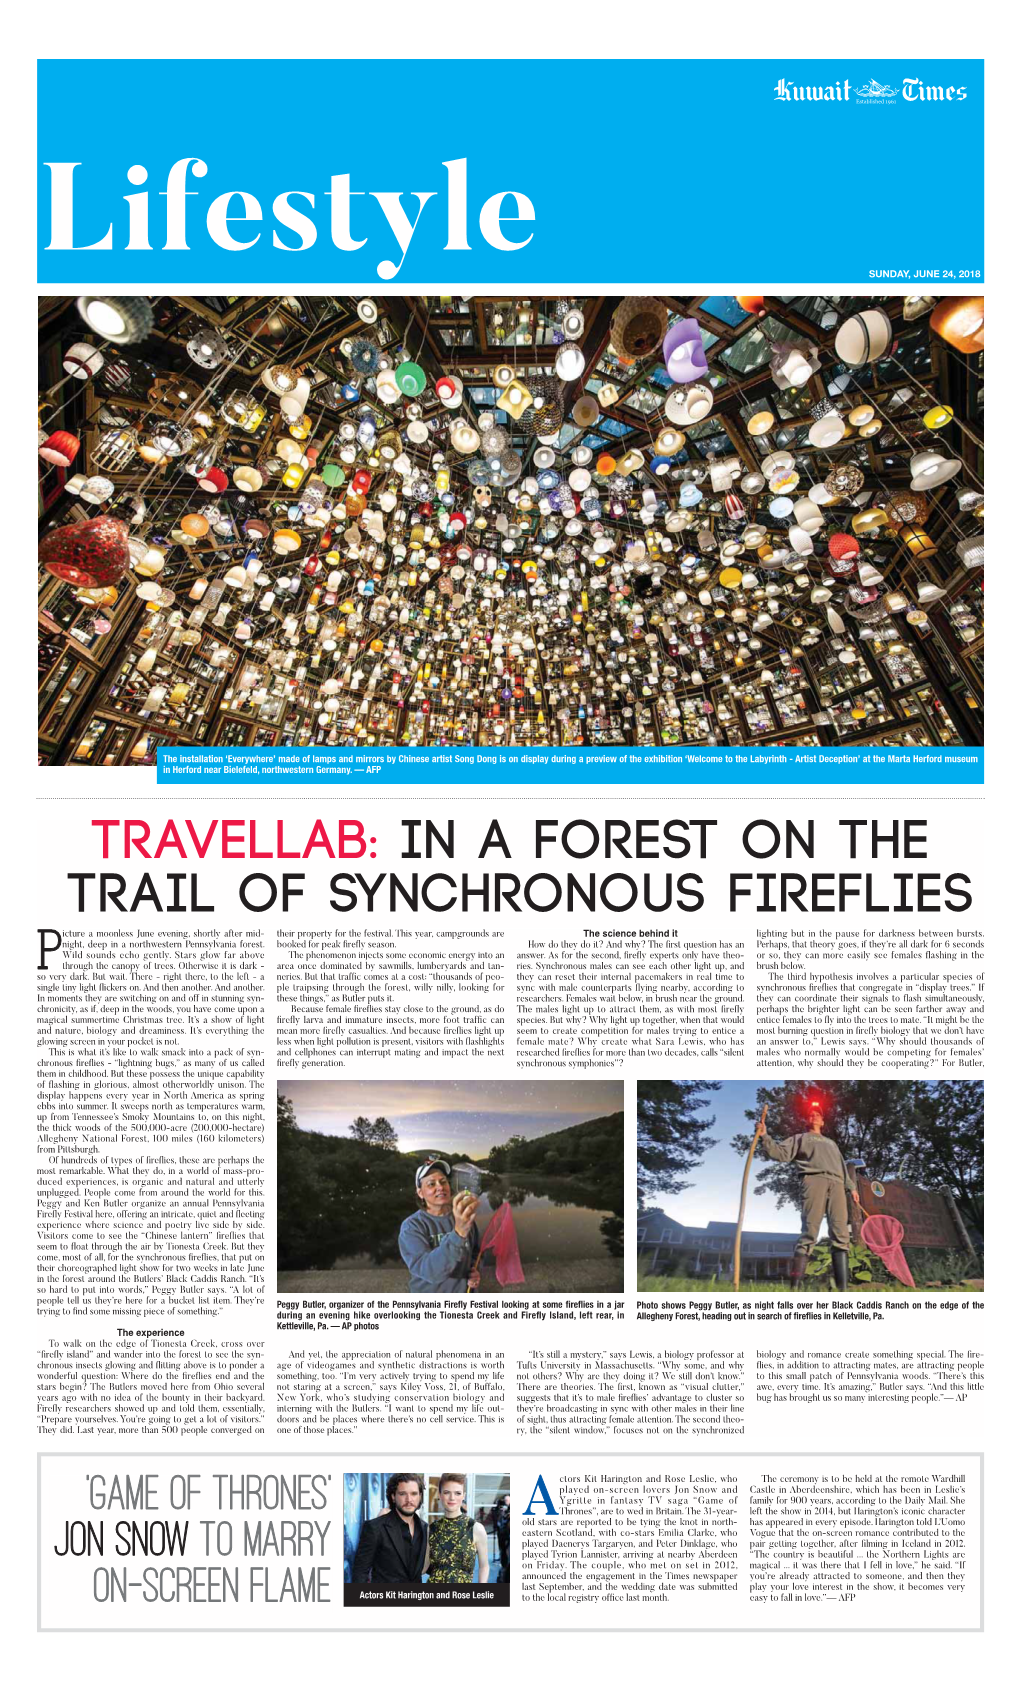 Travellab: in a Forest on the Trail of Synchronous Fireflies